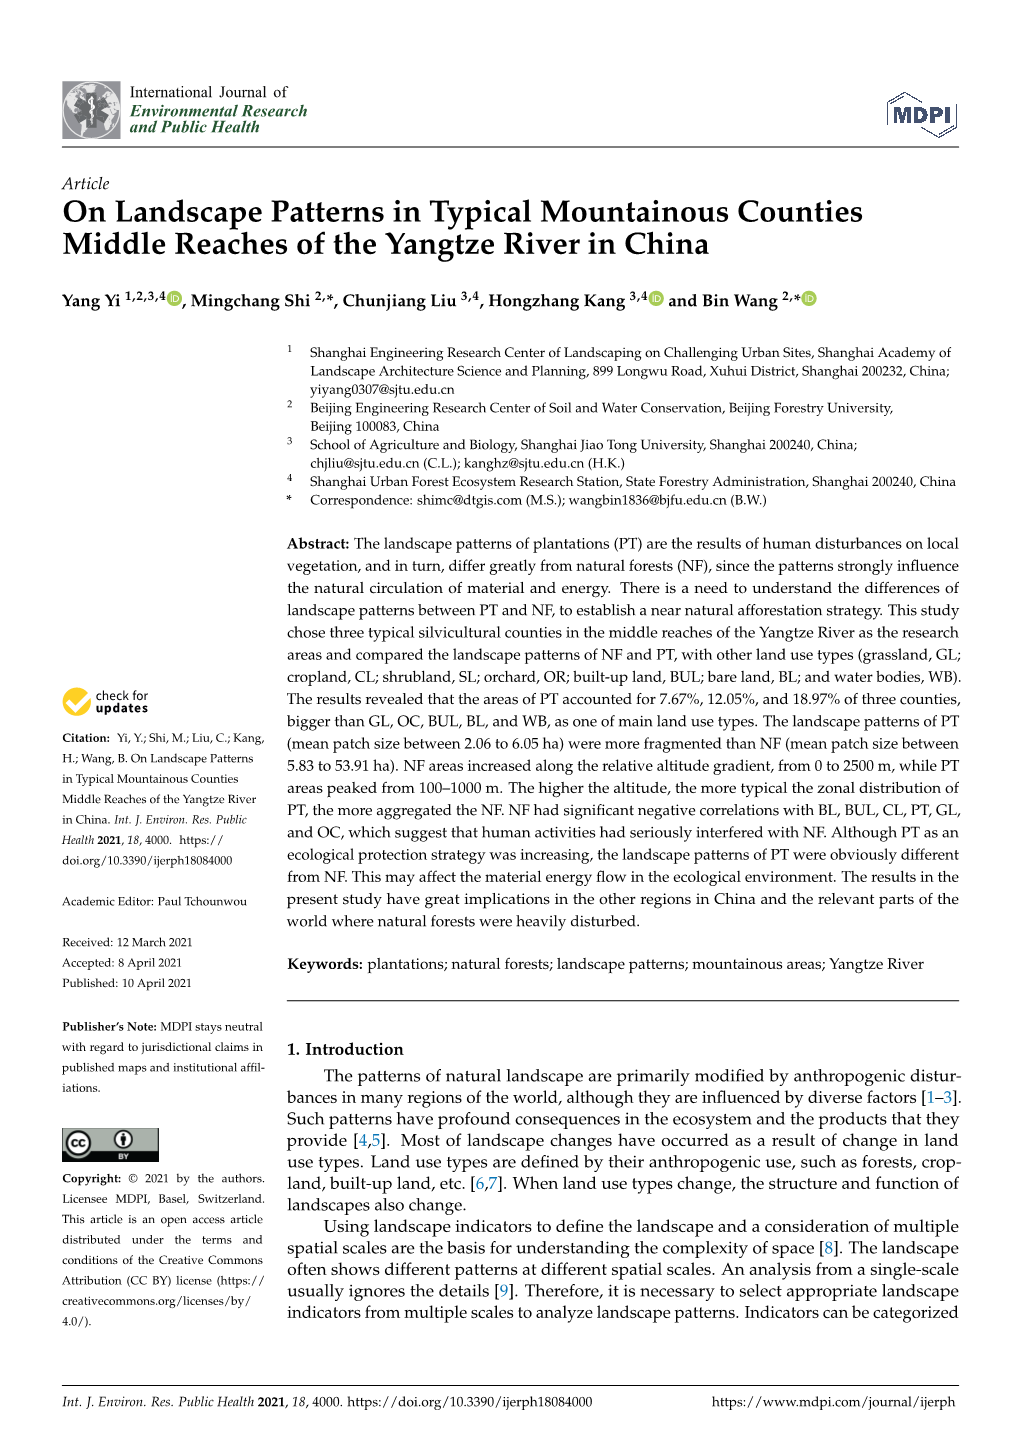 On Landscape Patterns in Typical Mountainous Counties Middle Reaches of the Yangtze River in China